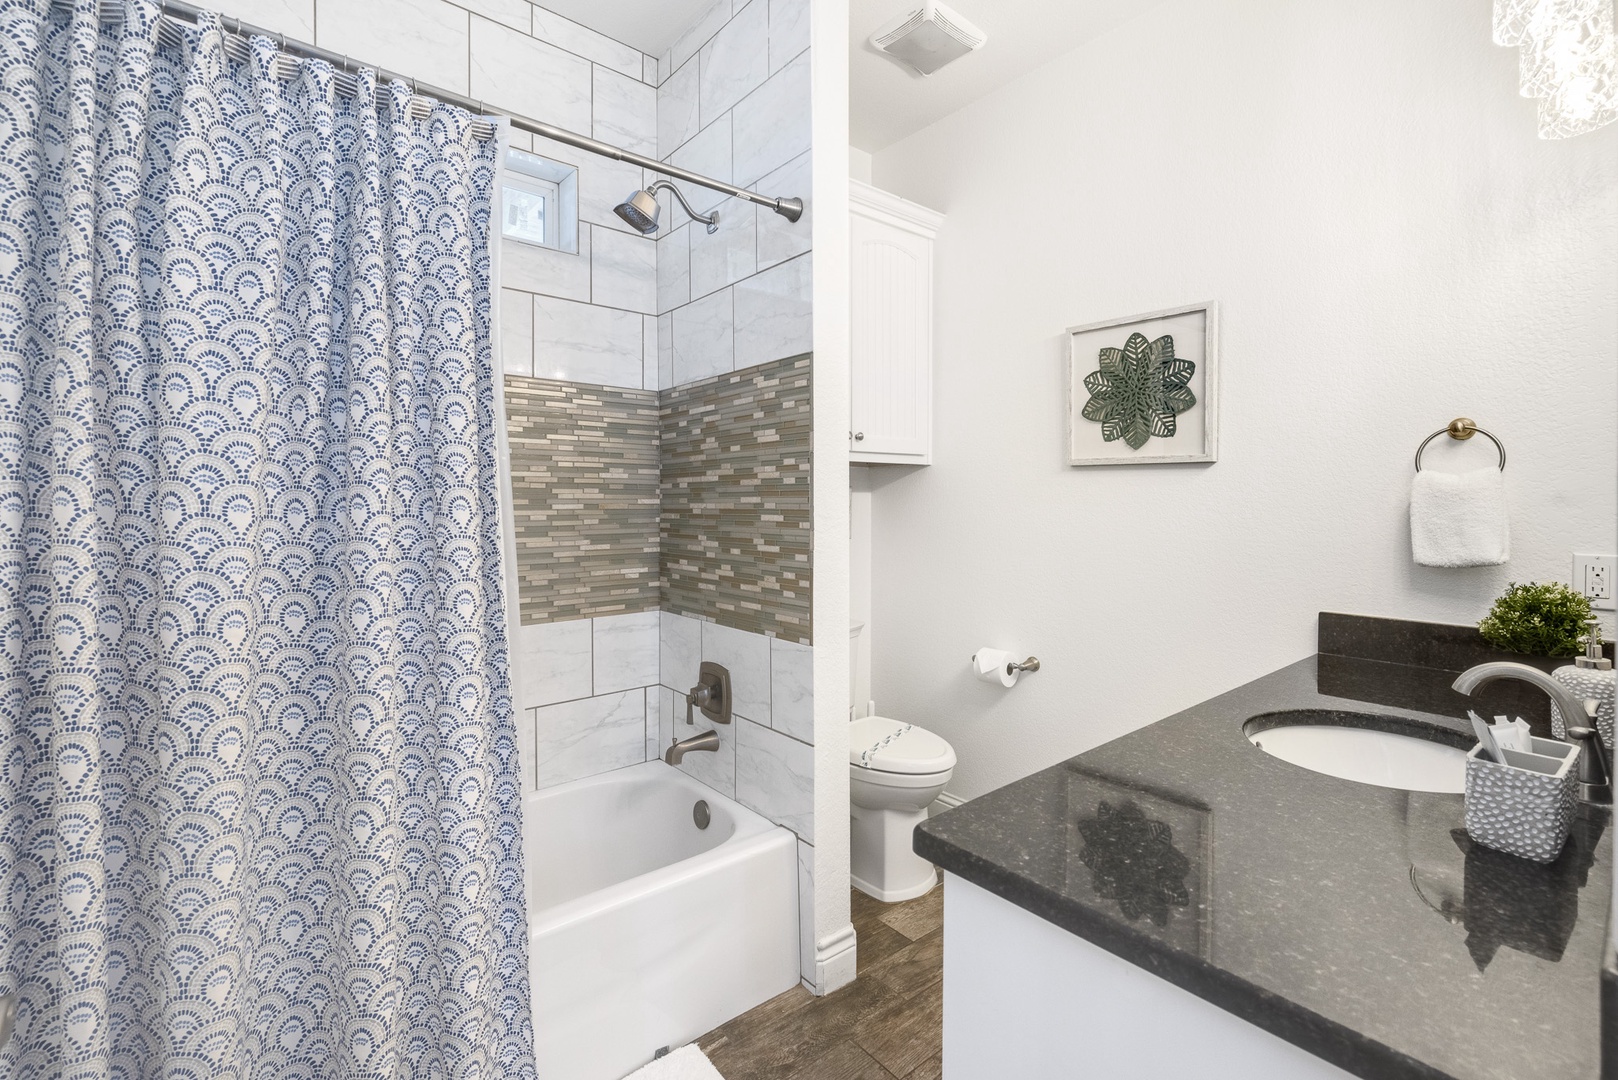 The 2nd Floor Shared Bathroom offers an oversized Single Vanity and tile Shower/Tub Combo